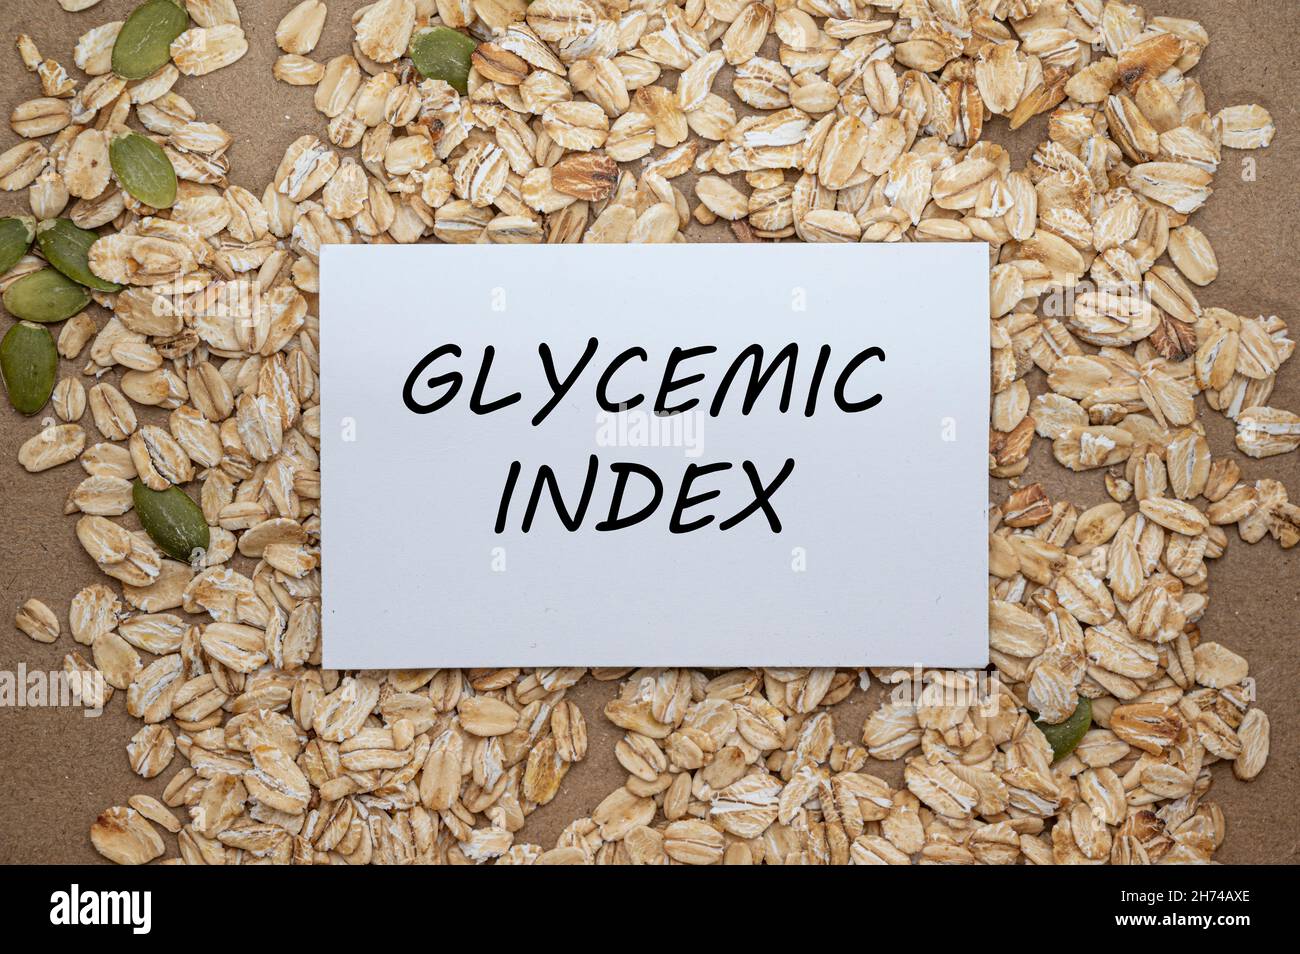 Top view of card with text Glycemic index on oat and seeds background. Healthy eating concept. Stock Photo